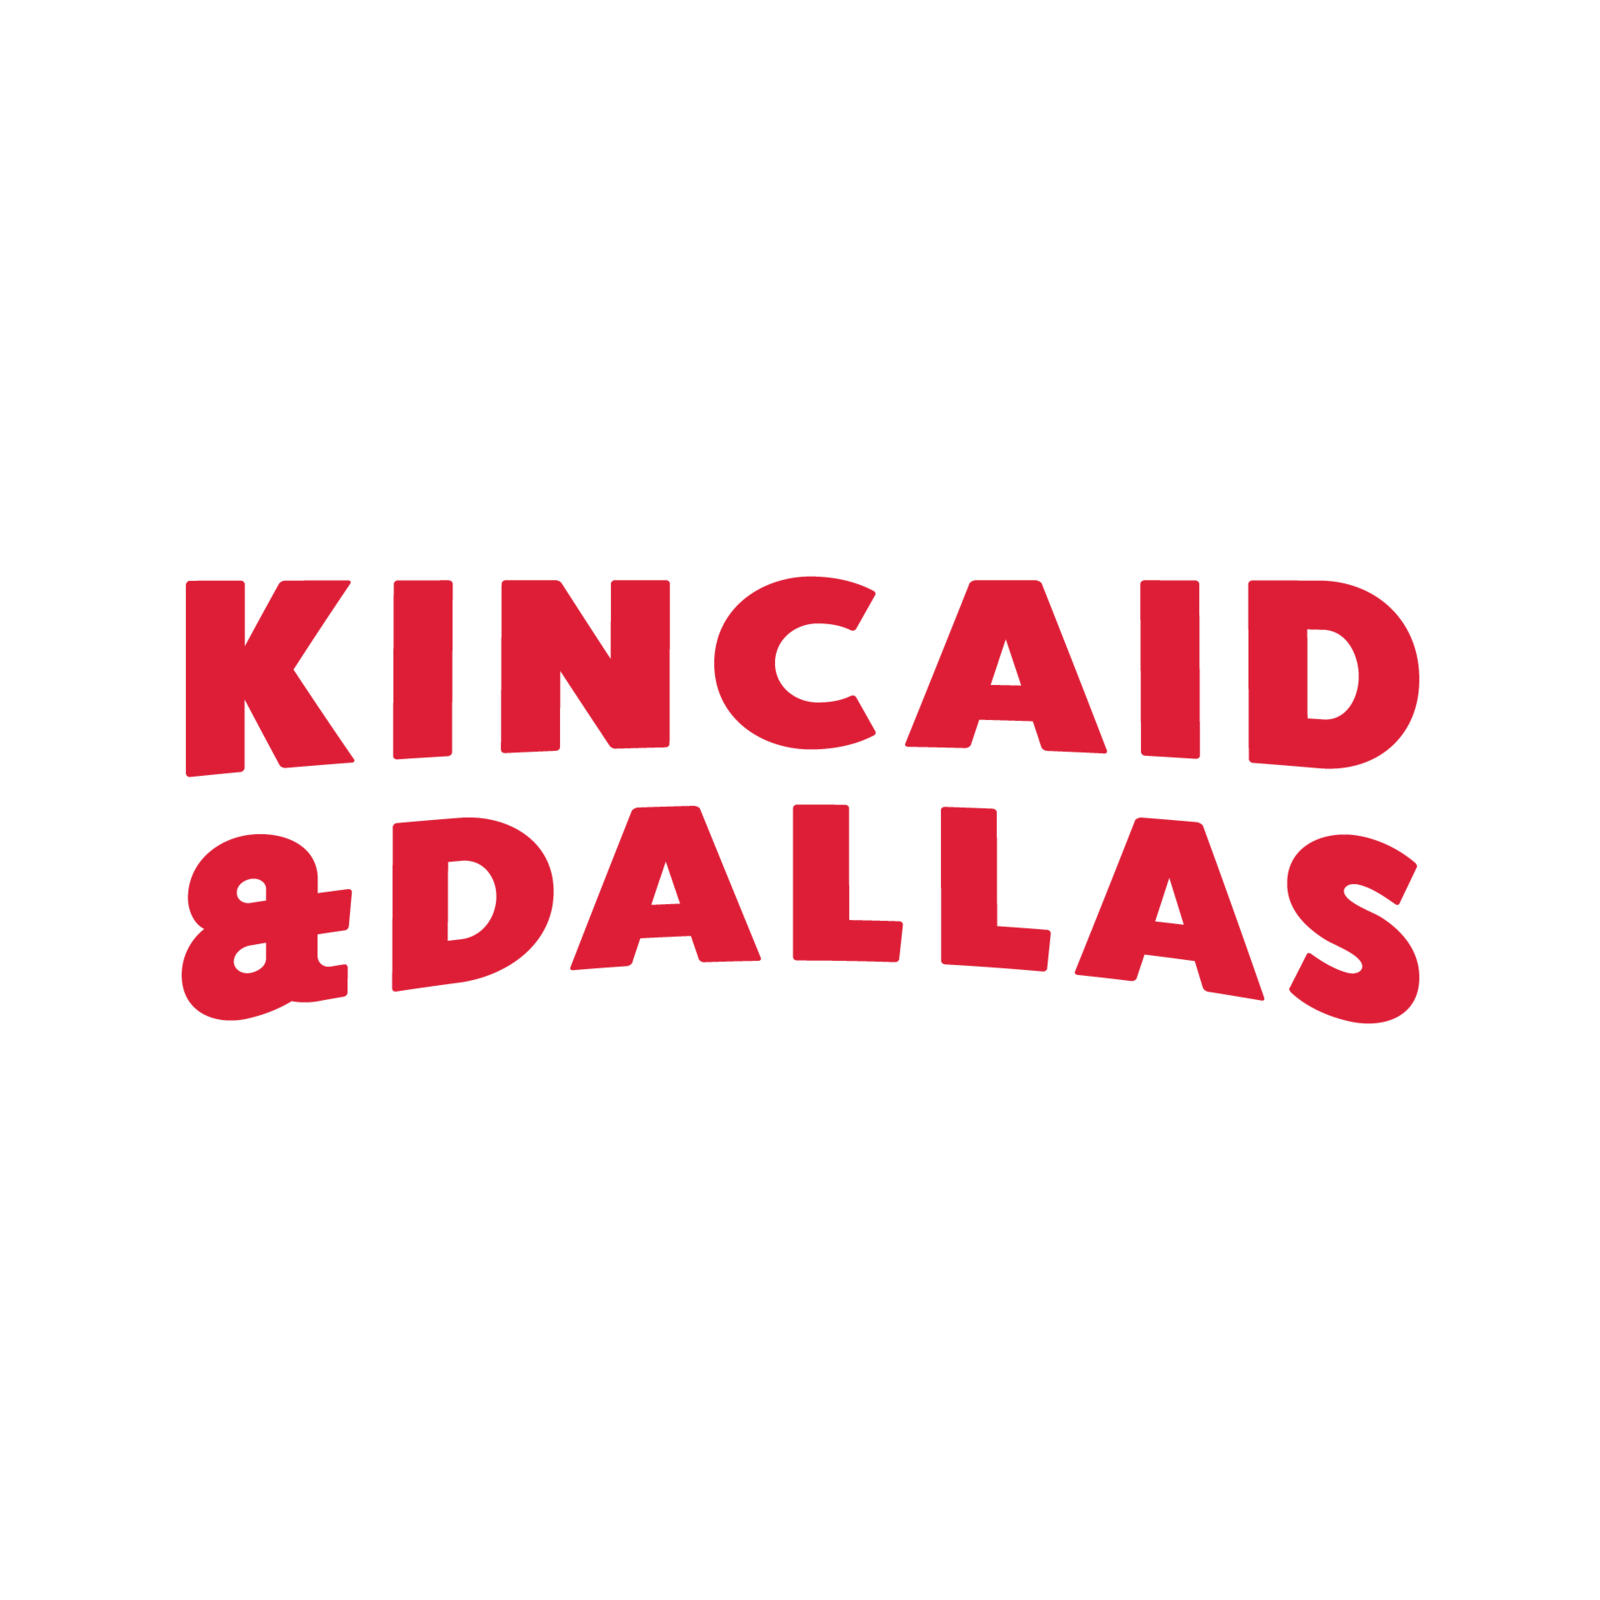 Today on Kincaid and Dallas - Monday, May 2nd